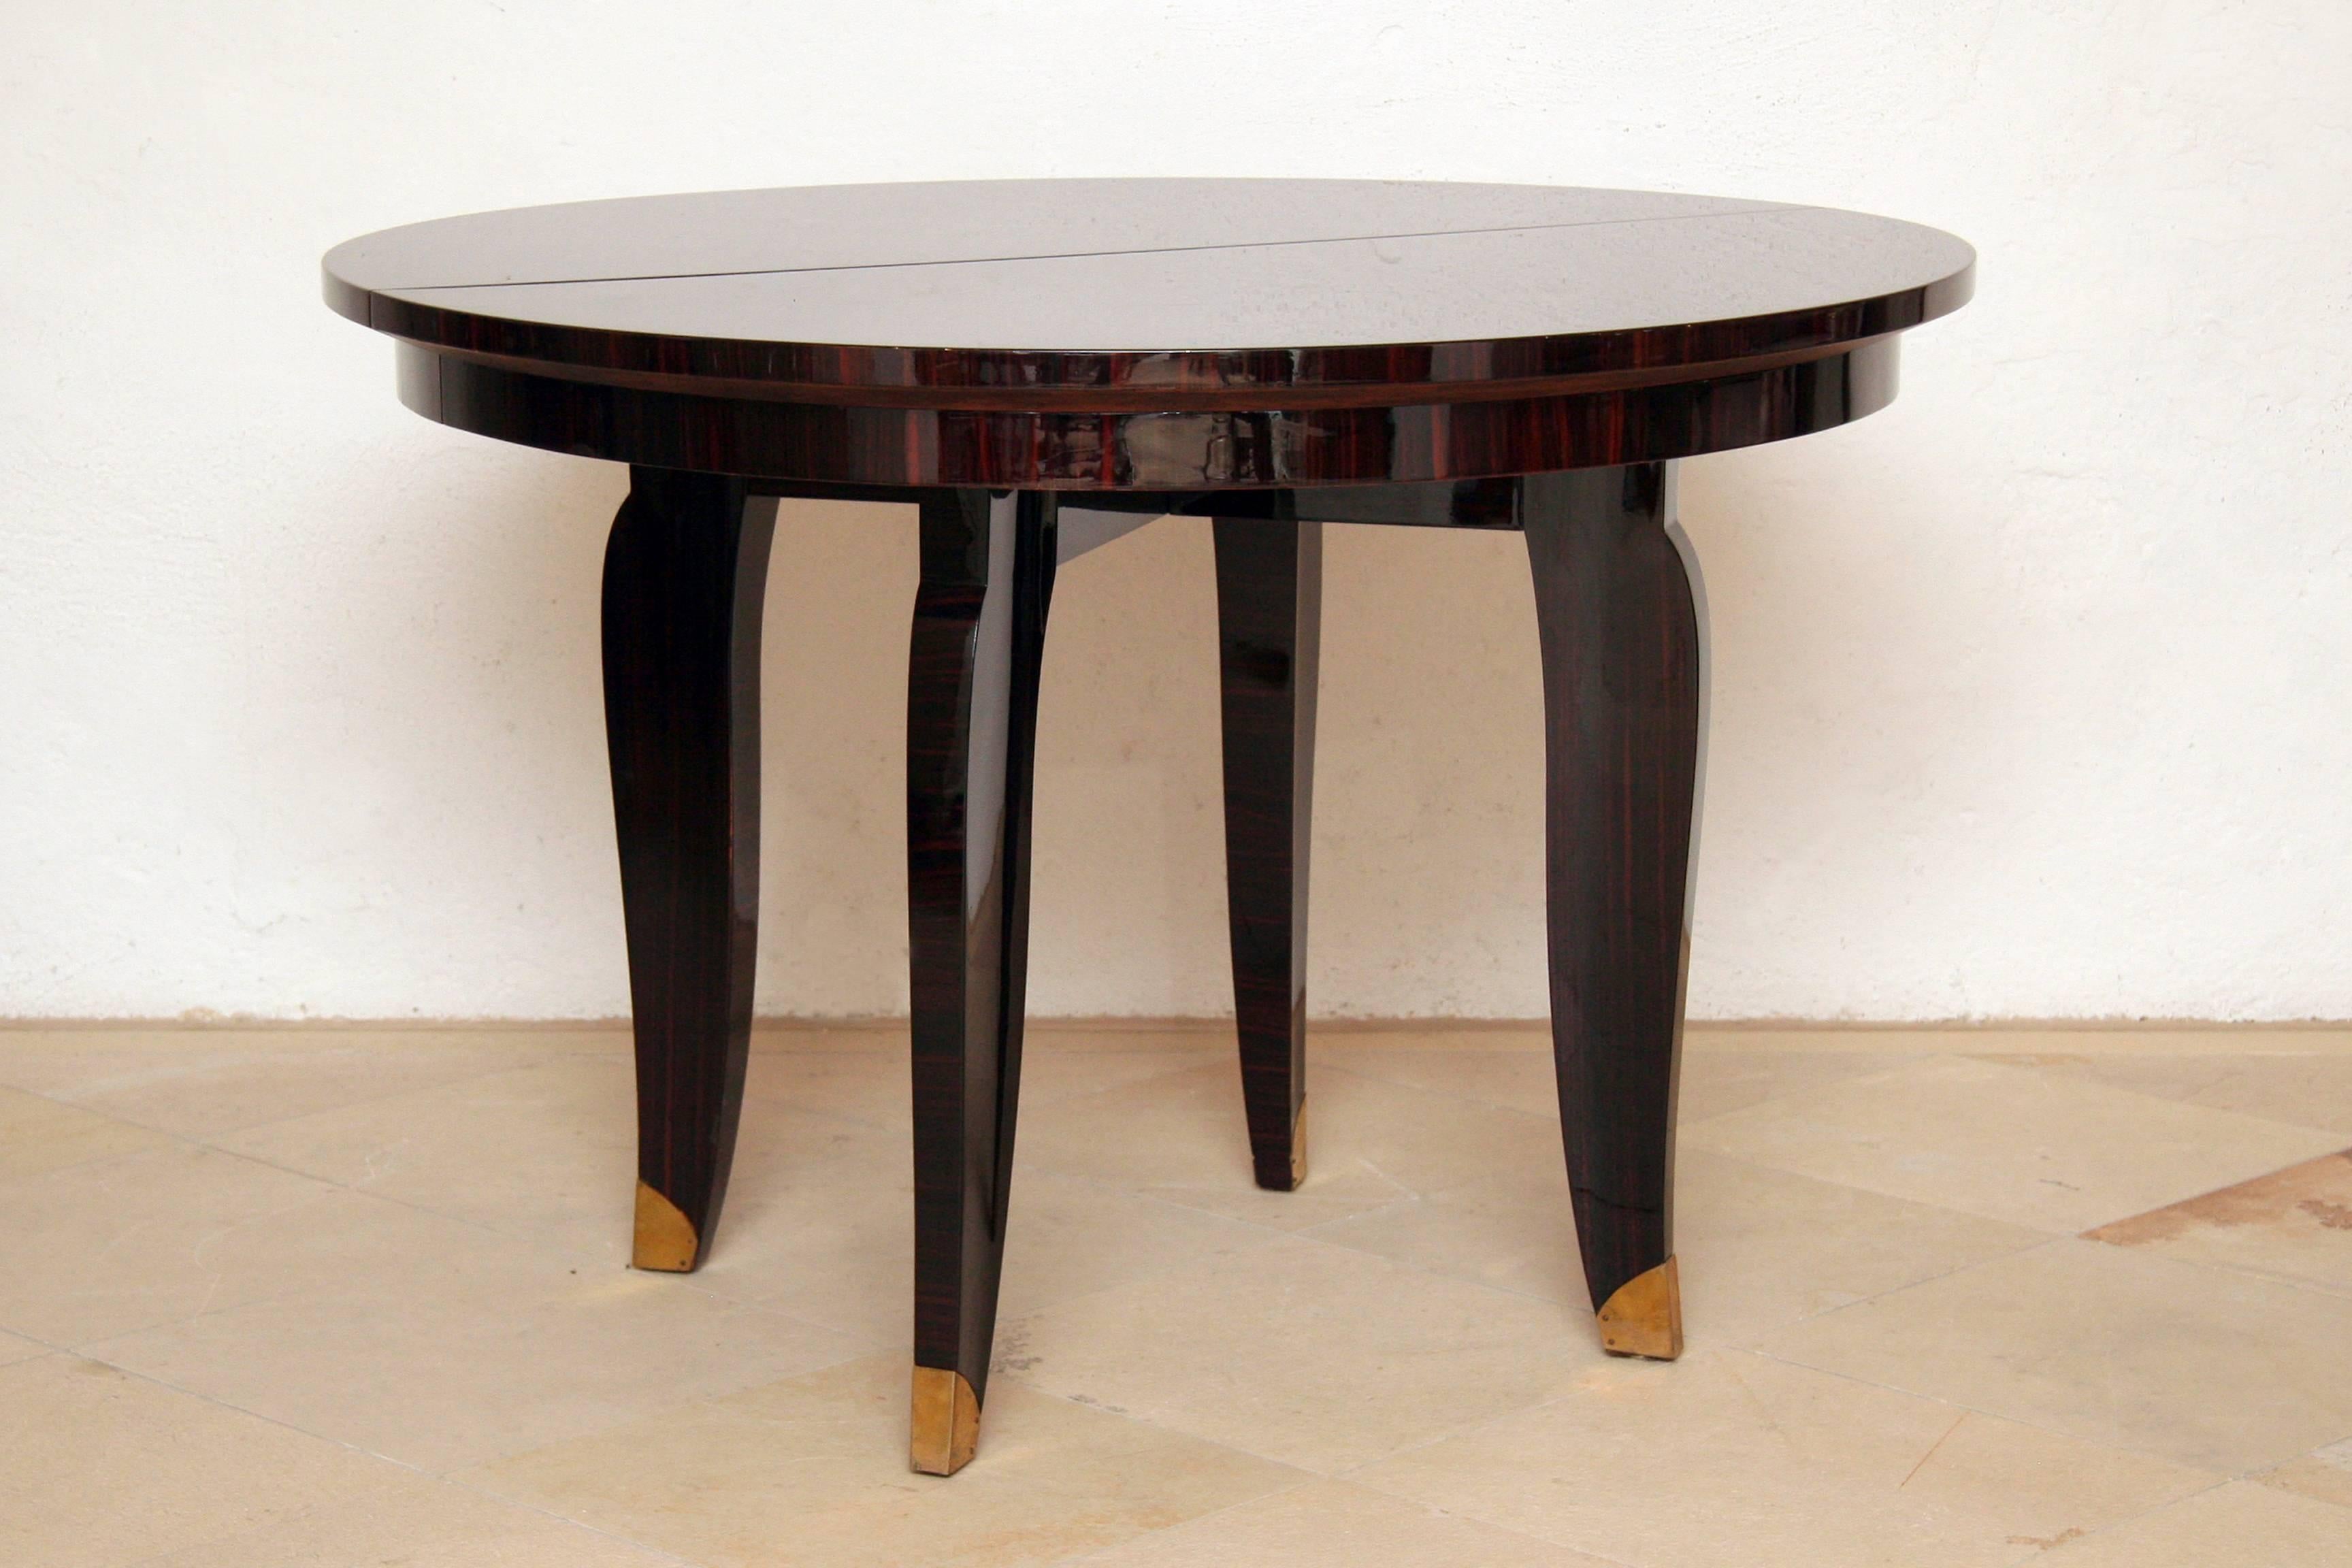 Elegant French Art Deco round dining table (extendable) or center table with wonderful warm and brilliant Macassar ebony veneer, four tapered Macassar wood legs with bronze trimming. Signed by stamp NANCY 1935
The grain of the Macassar veneered